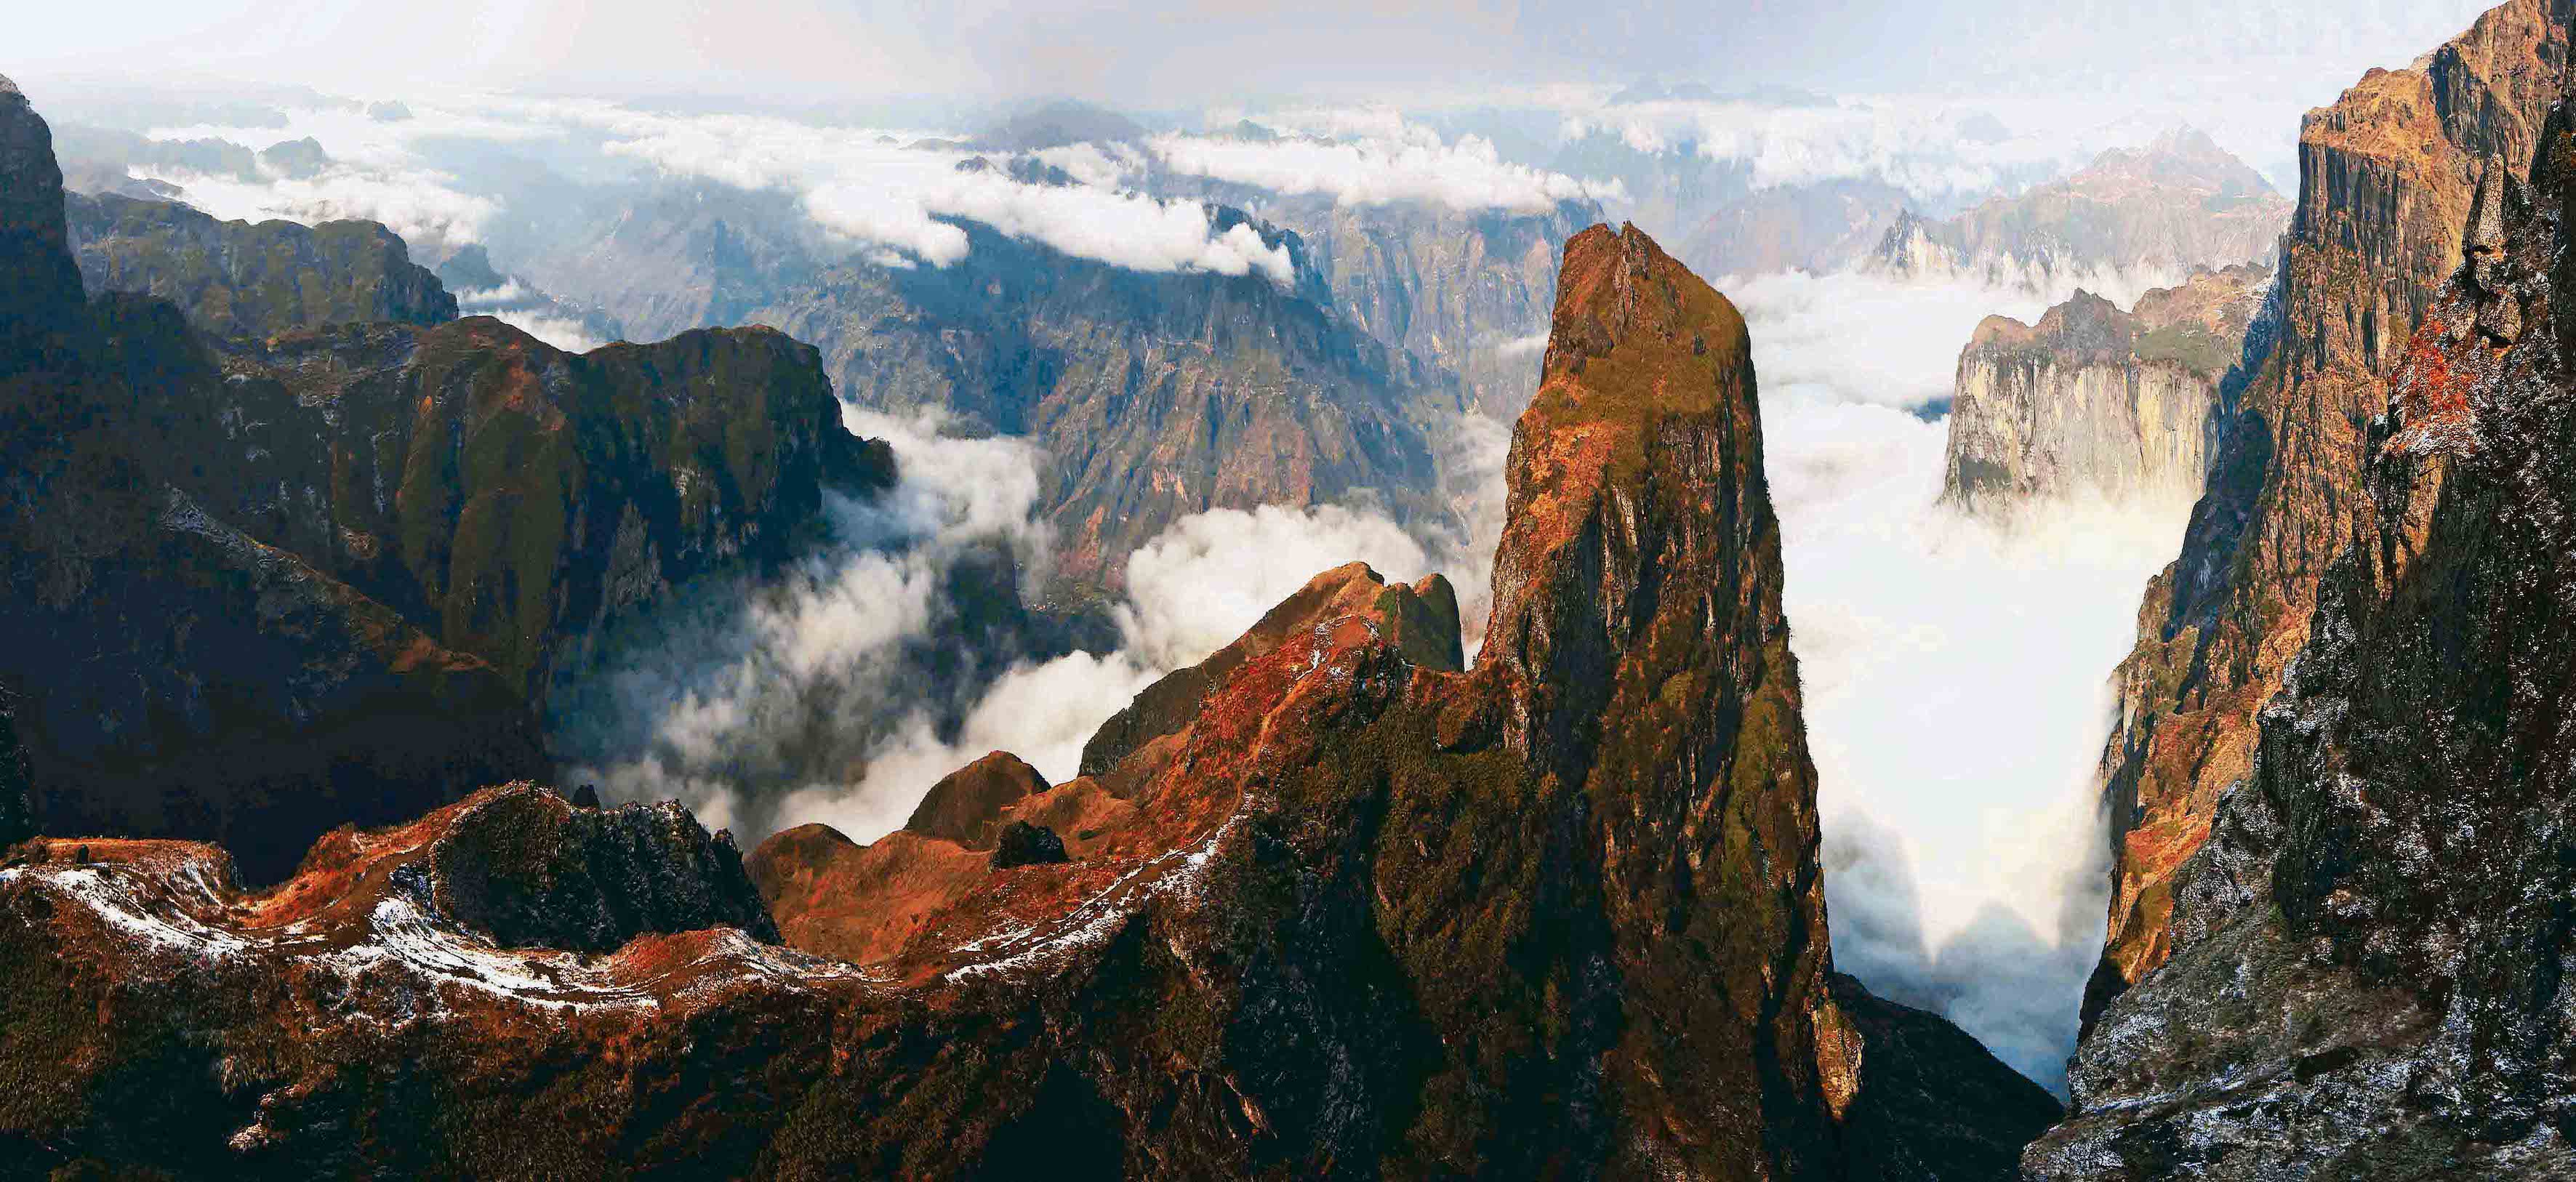 The grand canyons in Yunnan may have not yet risen to fame, but their beauty is said to be unrivalled in comparison to the many other popular attractions found in this southwestern Chinese province. /Photo provided to CGTN